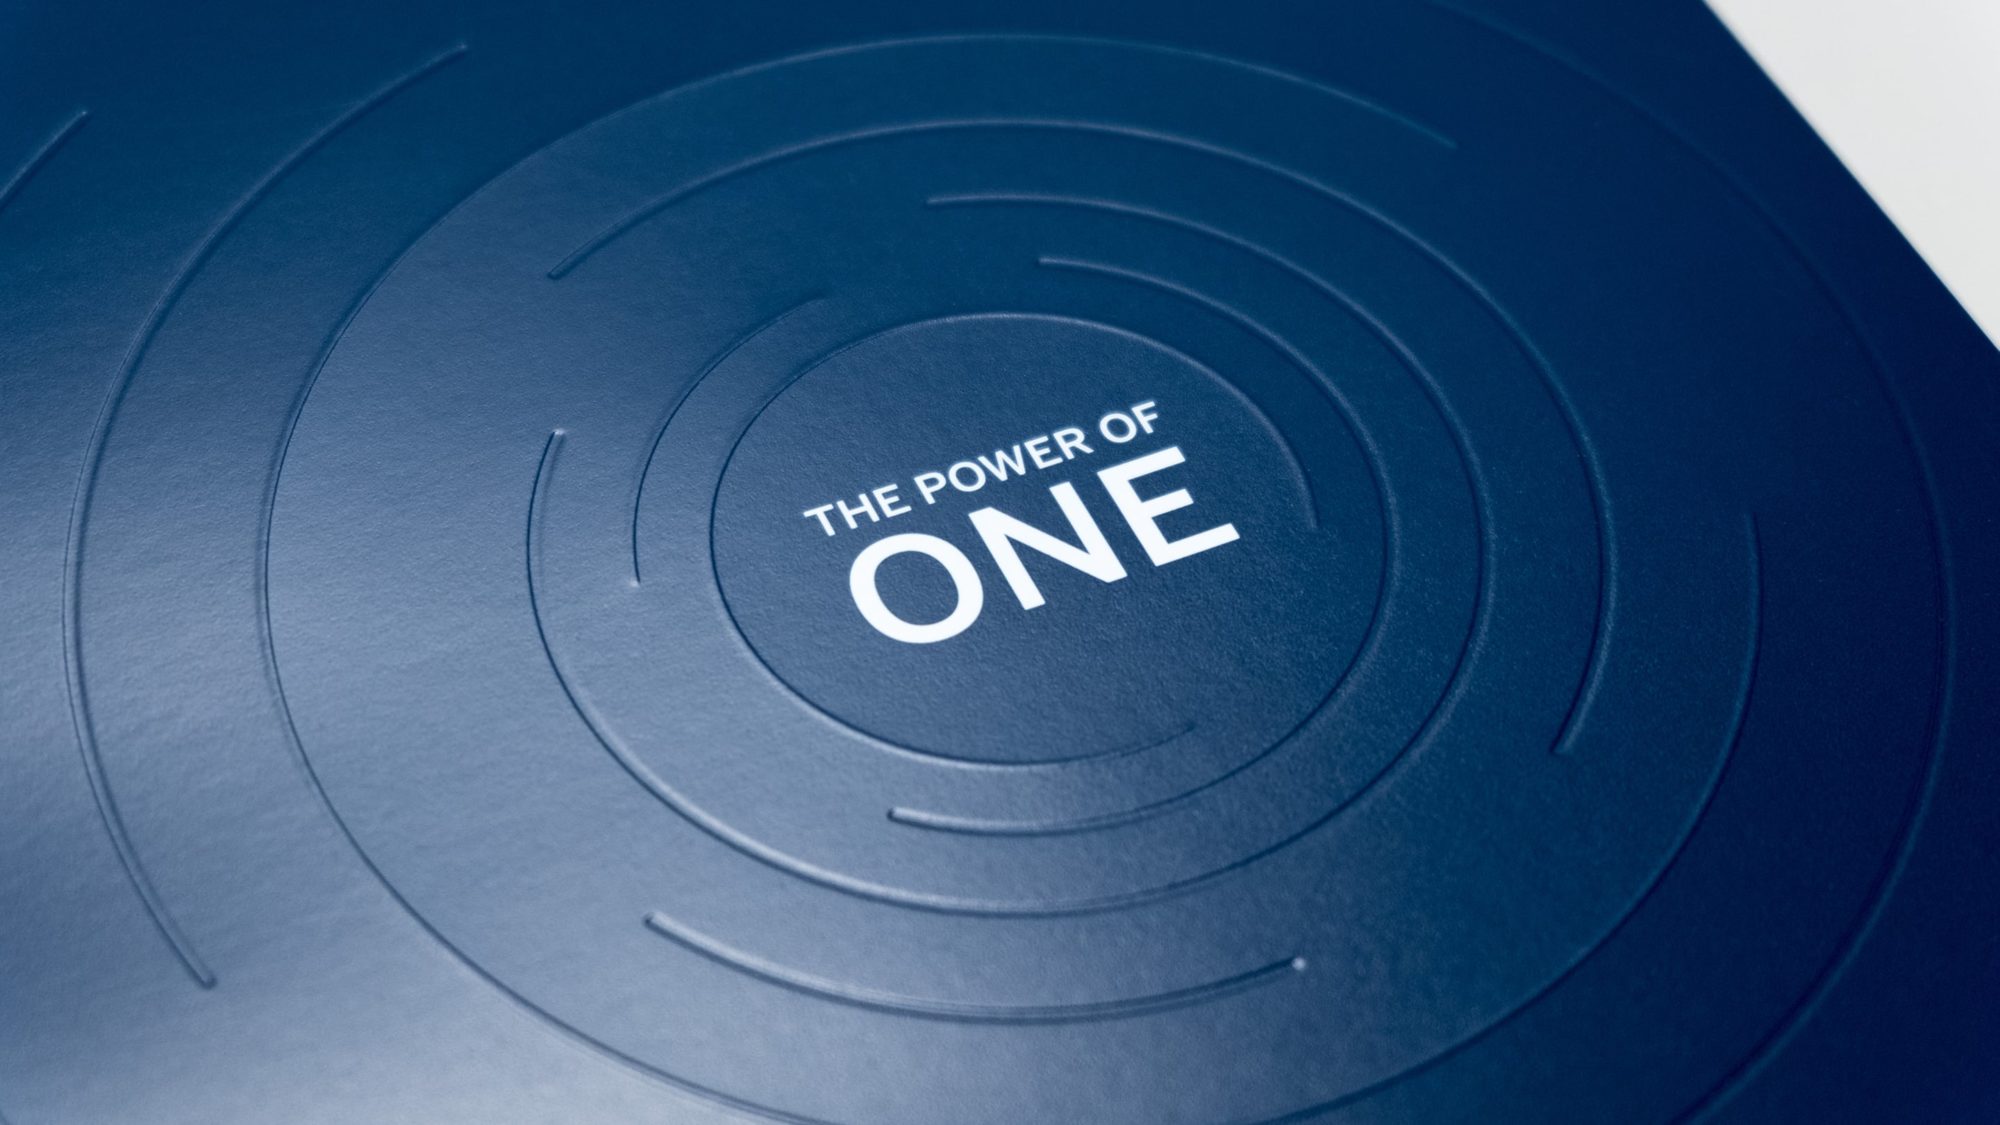 Cover showing report title "The Power of One" with surrounding emboss/deboss ripple effect